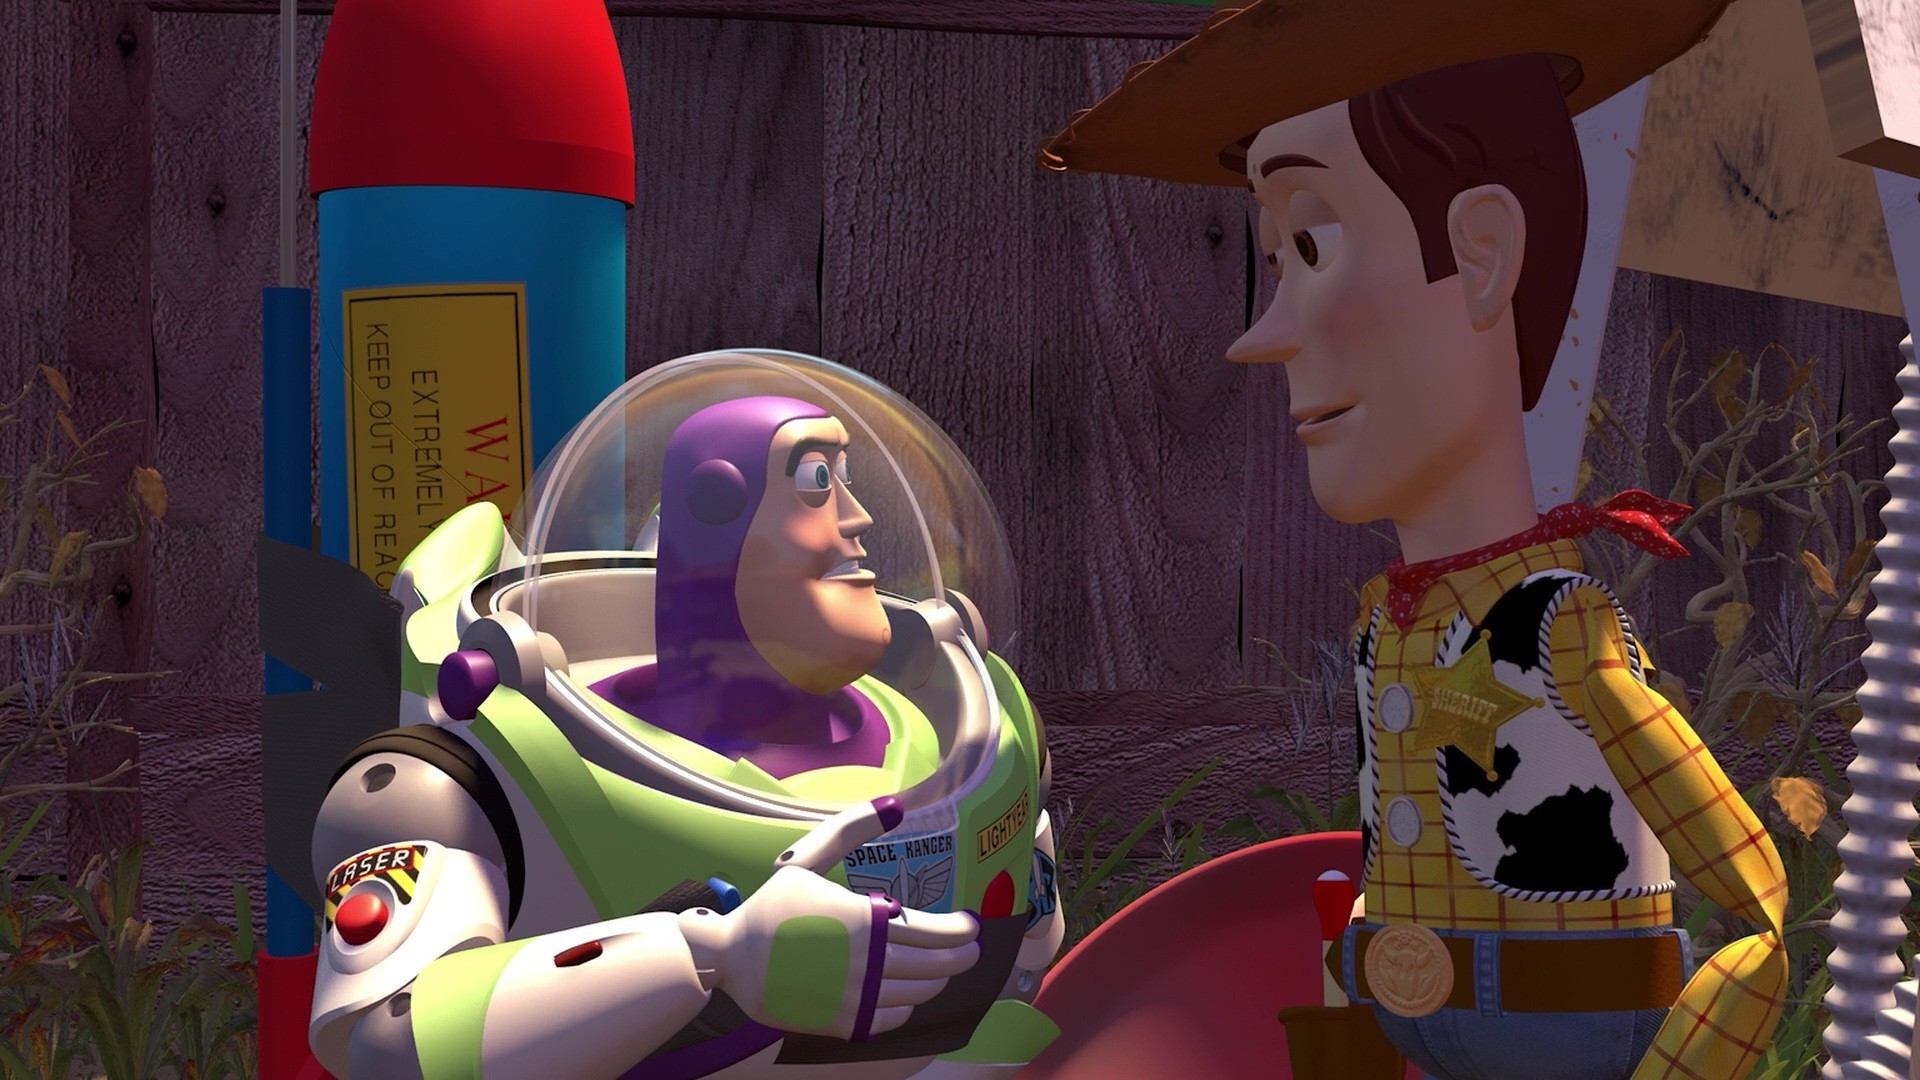 Movie Toy Story HD Wallpaper | Background Image